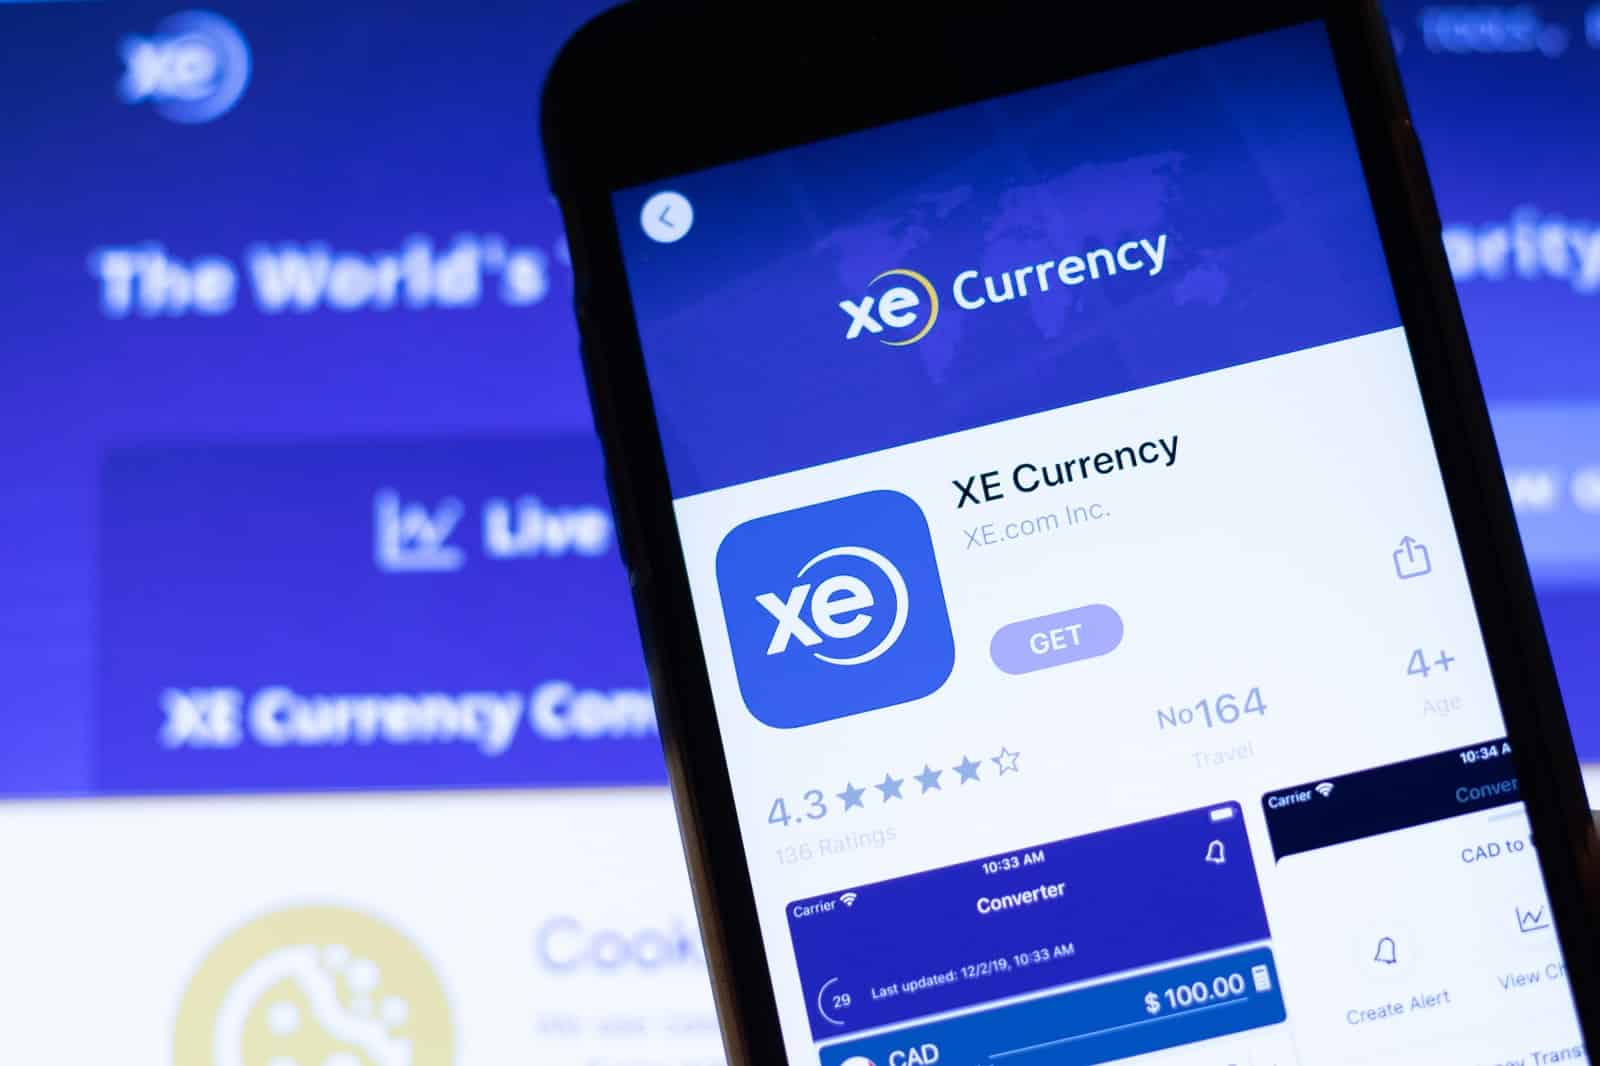 <p><span>While not a banking app per se, XE Currency Converter is essential for keeping track of exchange rates. It provides live exchange rates for almost every currency, helping you make informed decisions about when to exchange money. The app also features historical charts and rate alerts and is simple to use.</span></p> <p><b>Insider’s Tip: </b><span>Check rates on XE before making large purchases or exchanges to ensure you’re getting a good deal.</span></p>